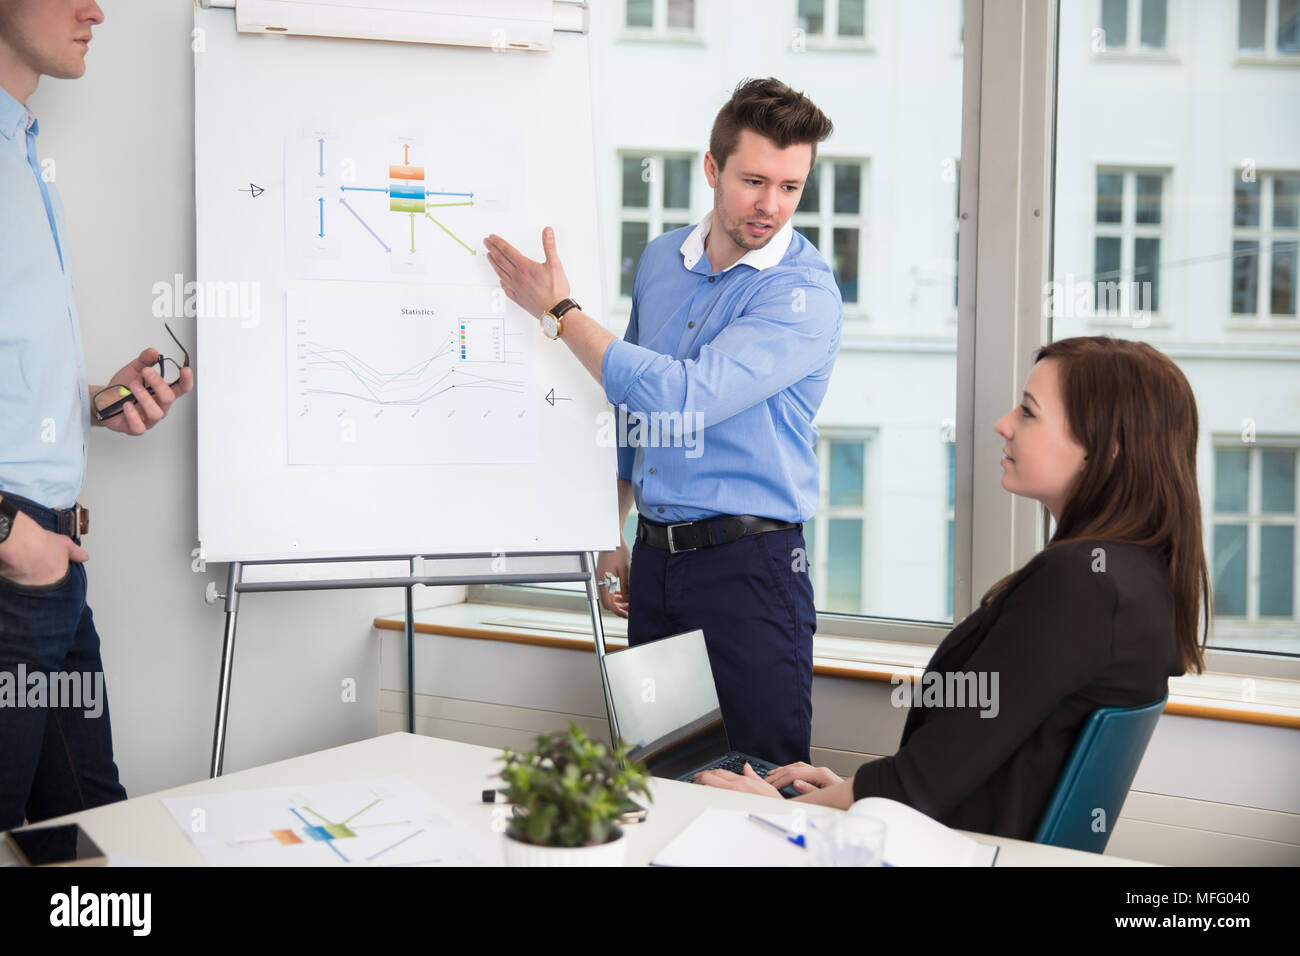 Businessman In Formals Giving Presentation To Colleagues Stock Photo